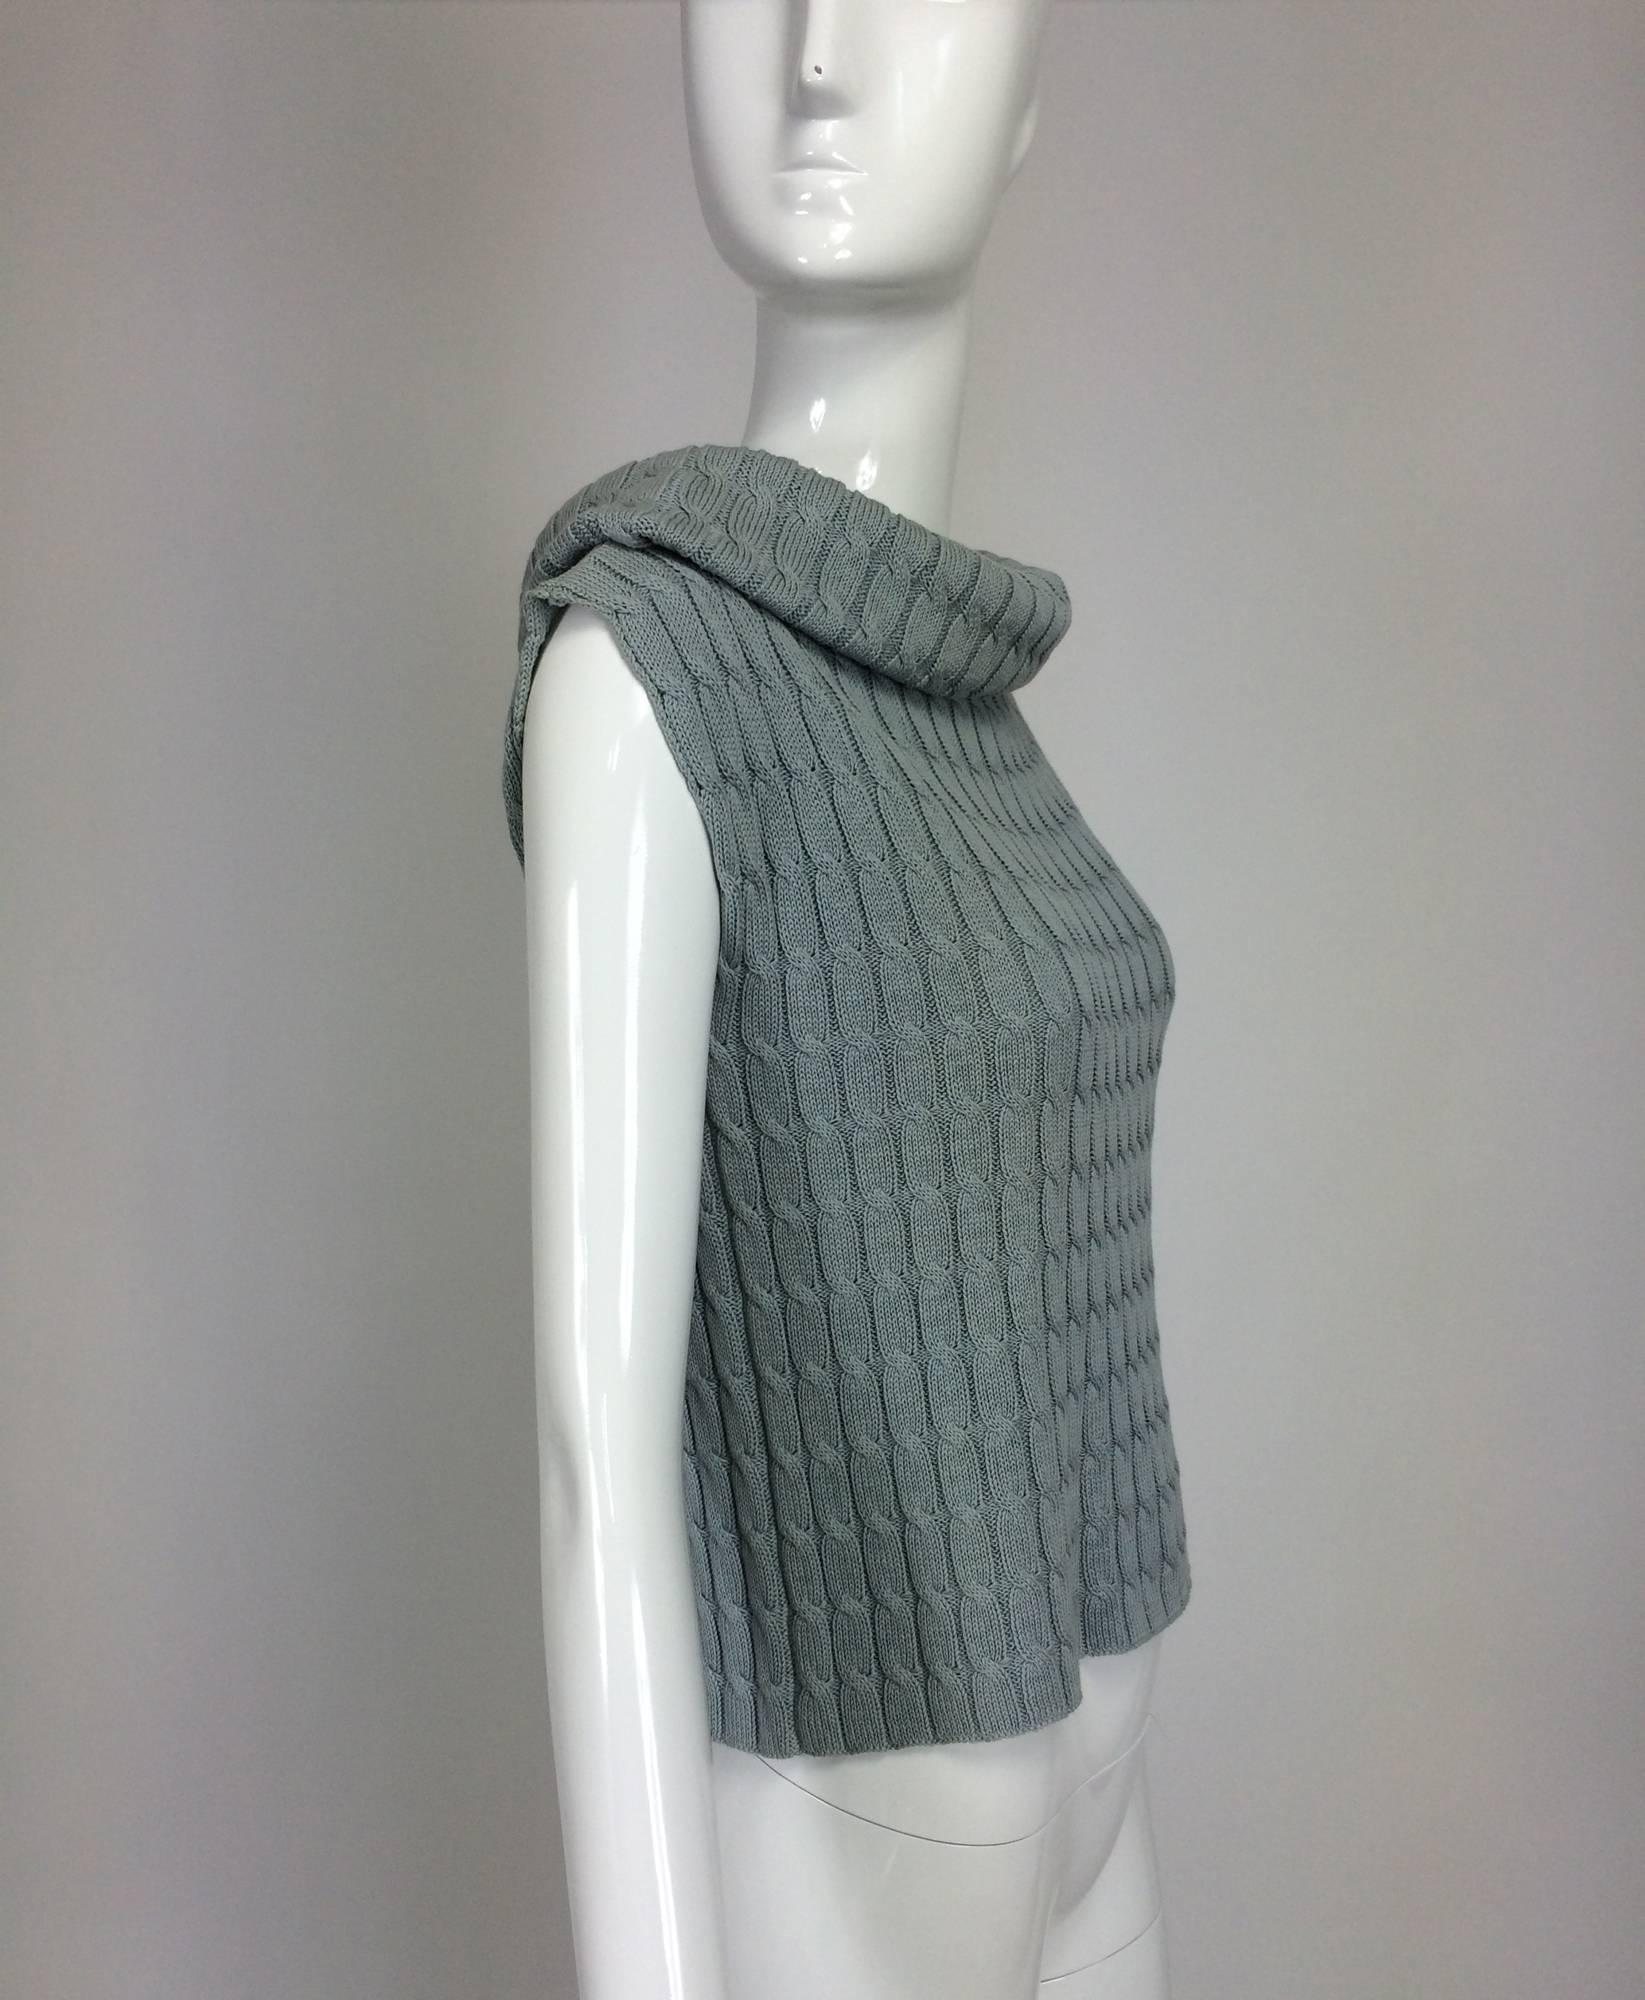 Zoran blue-grey cable knit sleeveless cowl neck sweater...100% cotton cable knit pull on sweater, unlined...Fits a size S-M

In excellent wearable condition... All our clothing is dry cleaned and inspected for condition and is ready to wear...Any